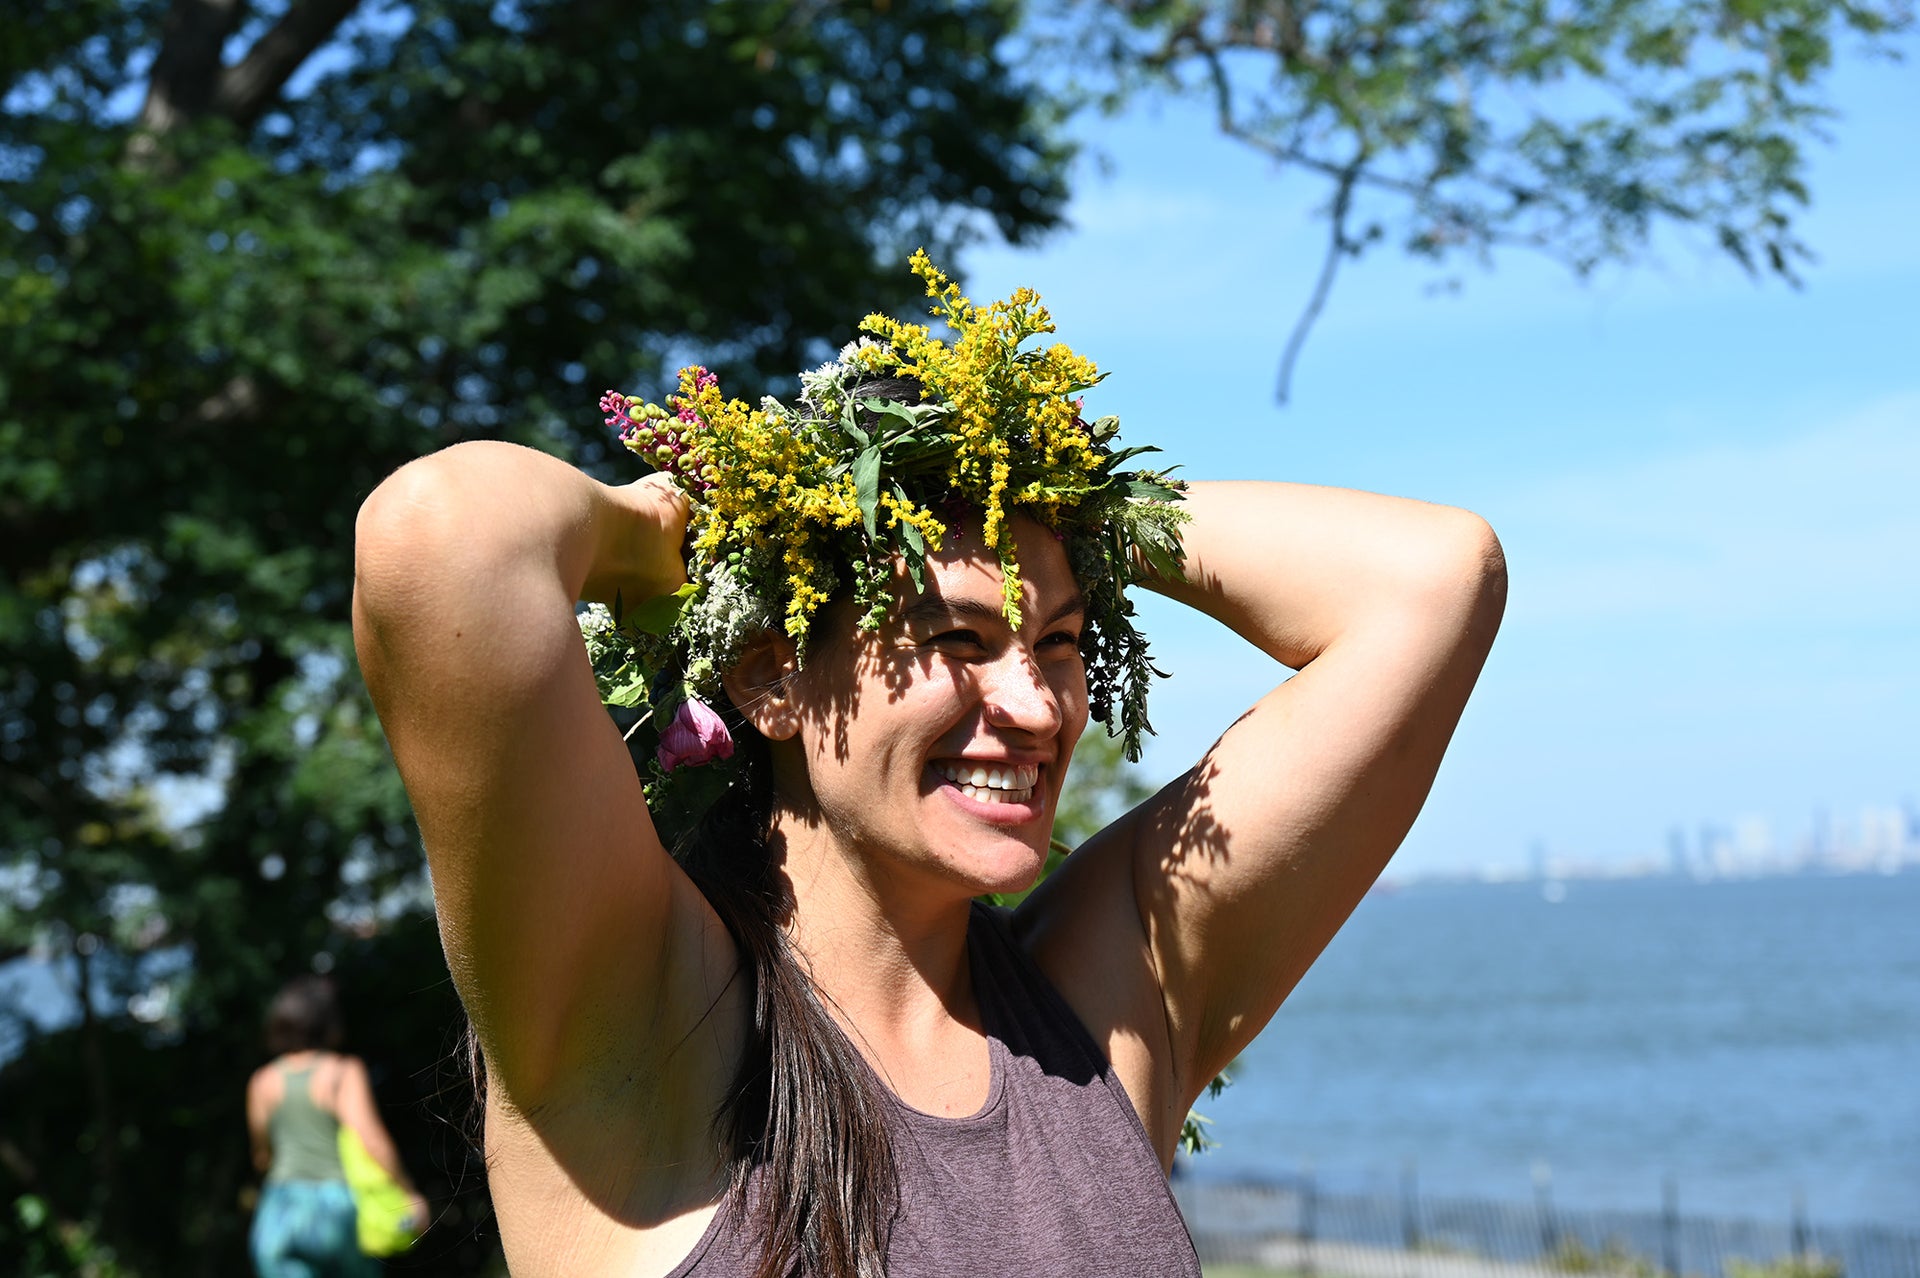 Load video: See how this woman is practicing sustainable minimalism right in her own neighborhood Glam Gardener NYC Staten Island outdoor educator aly stoffo